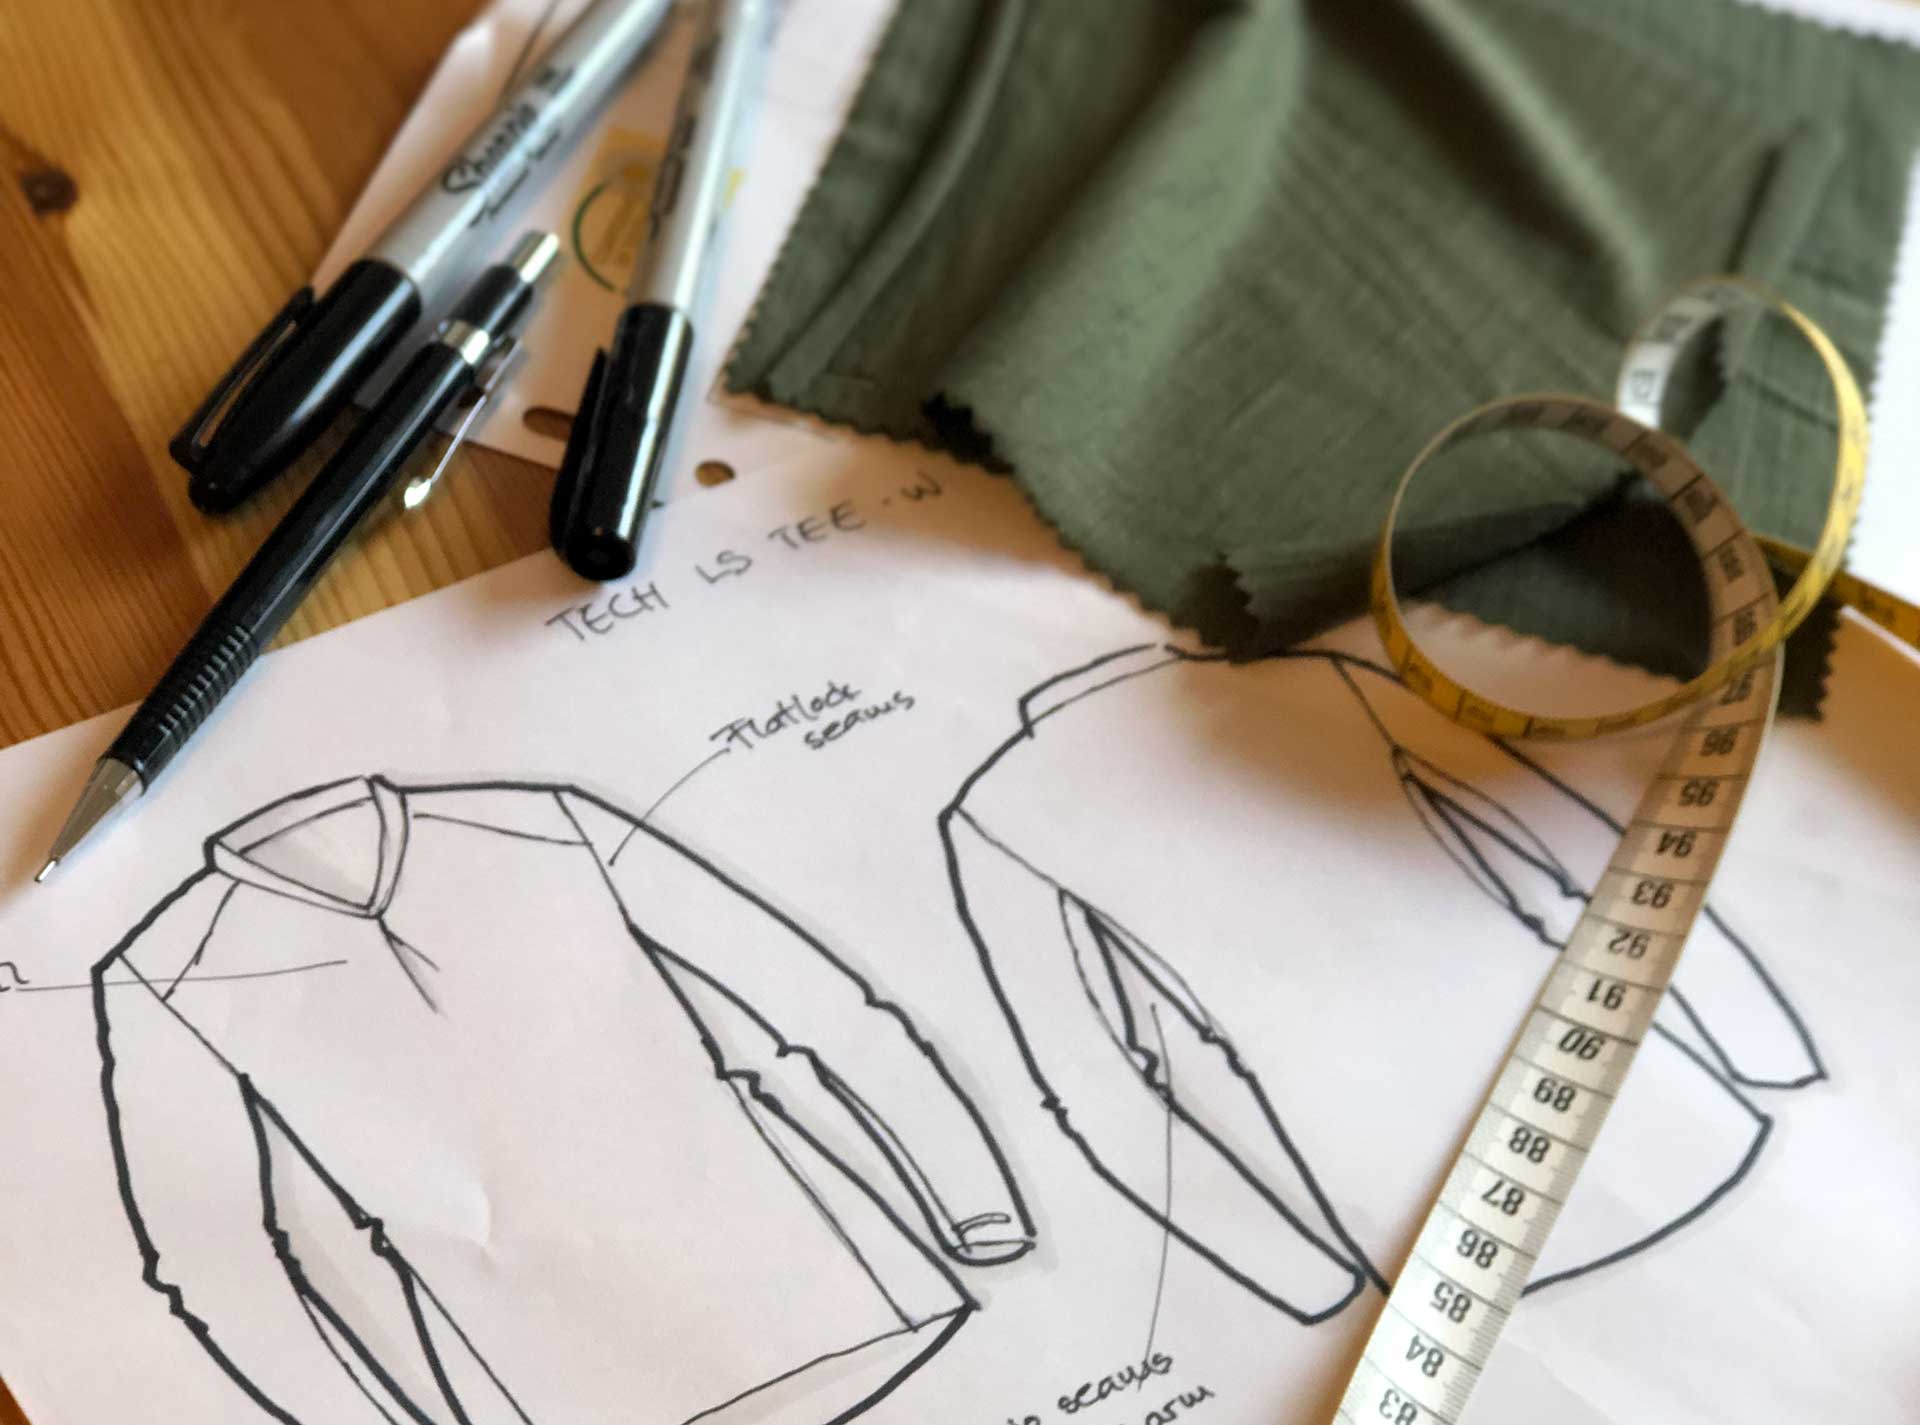 18 Steps To Start A Clothing Line